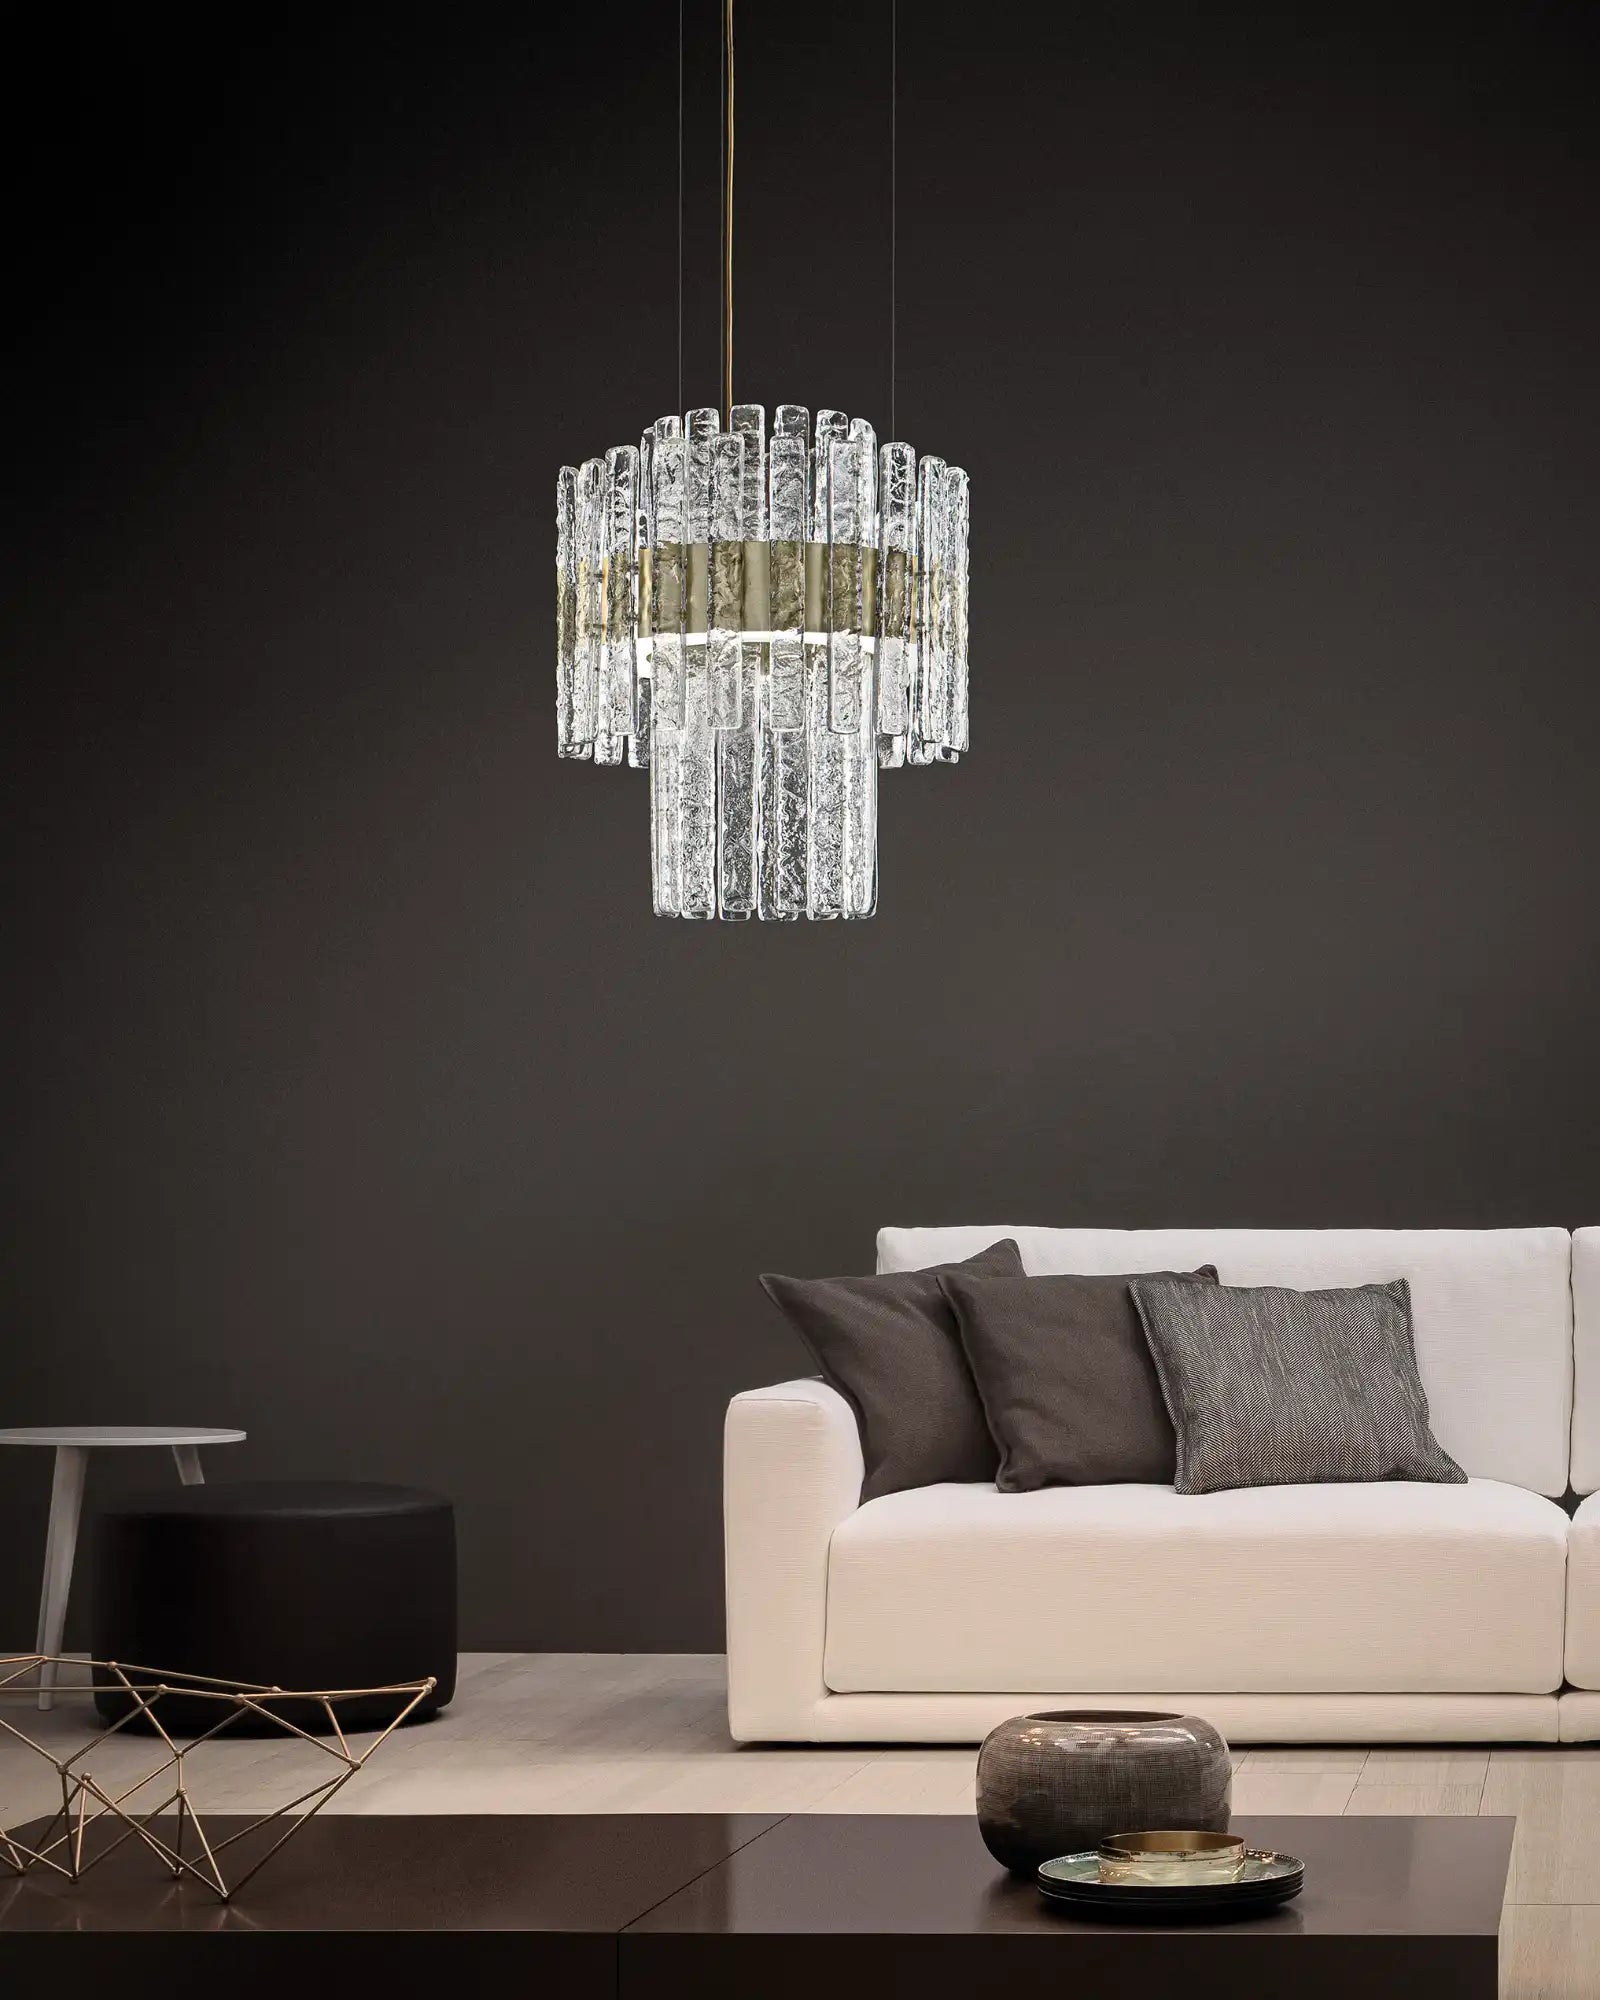 Vegas Chandelier by Masiero Lighting featured within a hotel lounge | Nook Collections